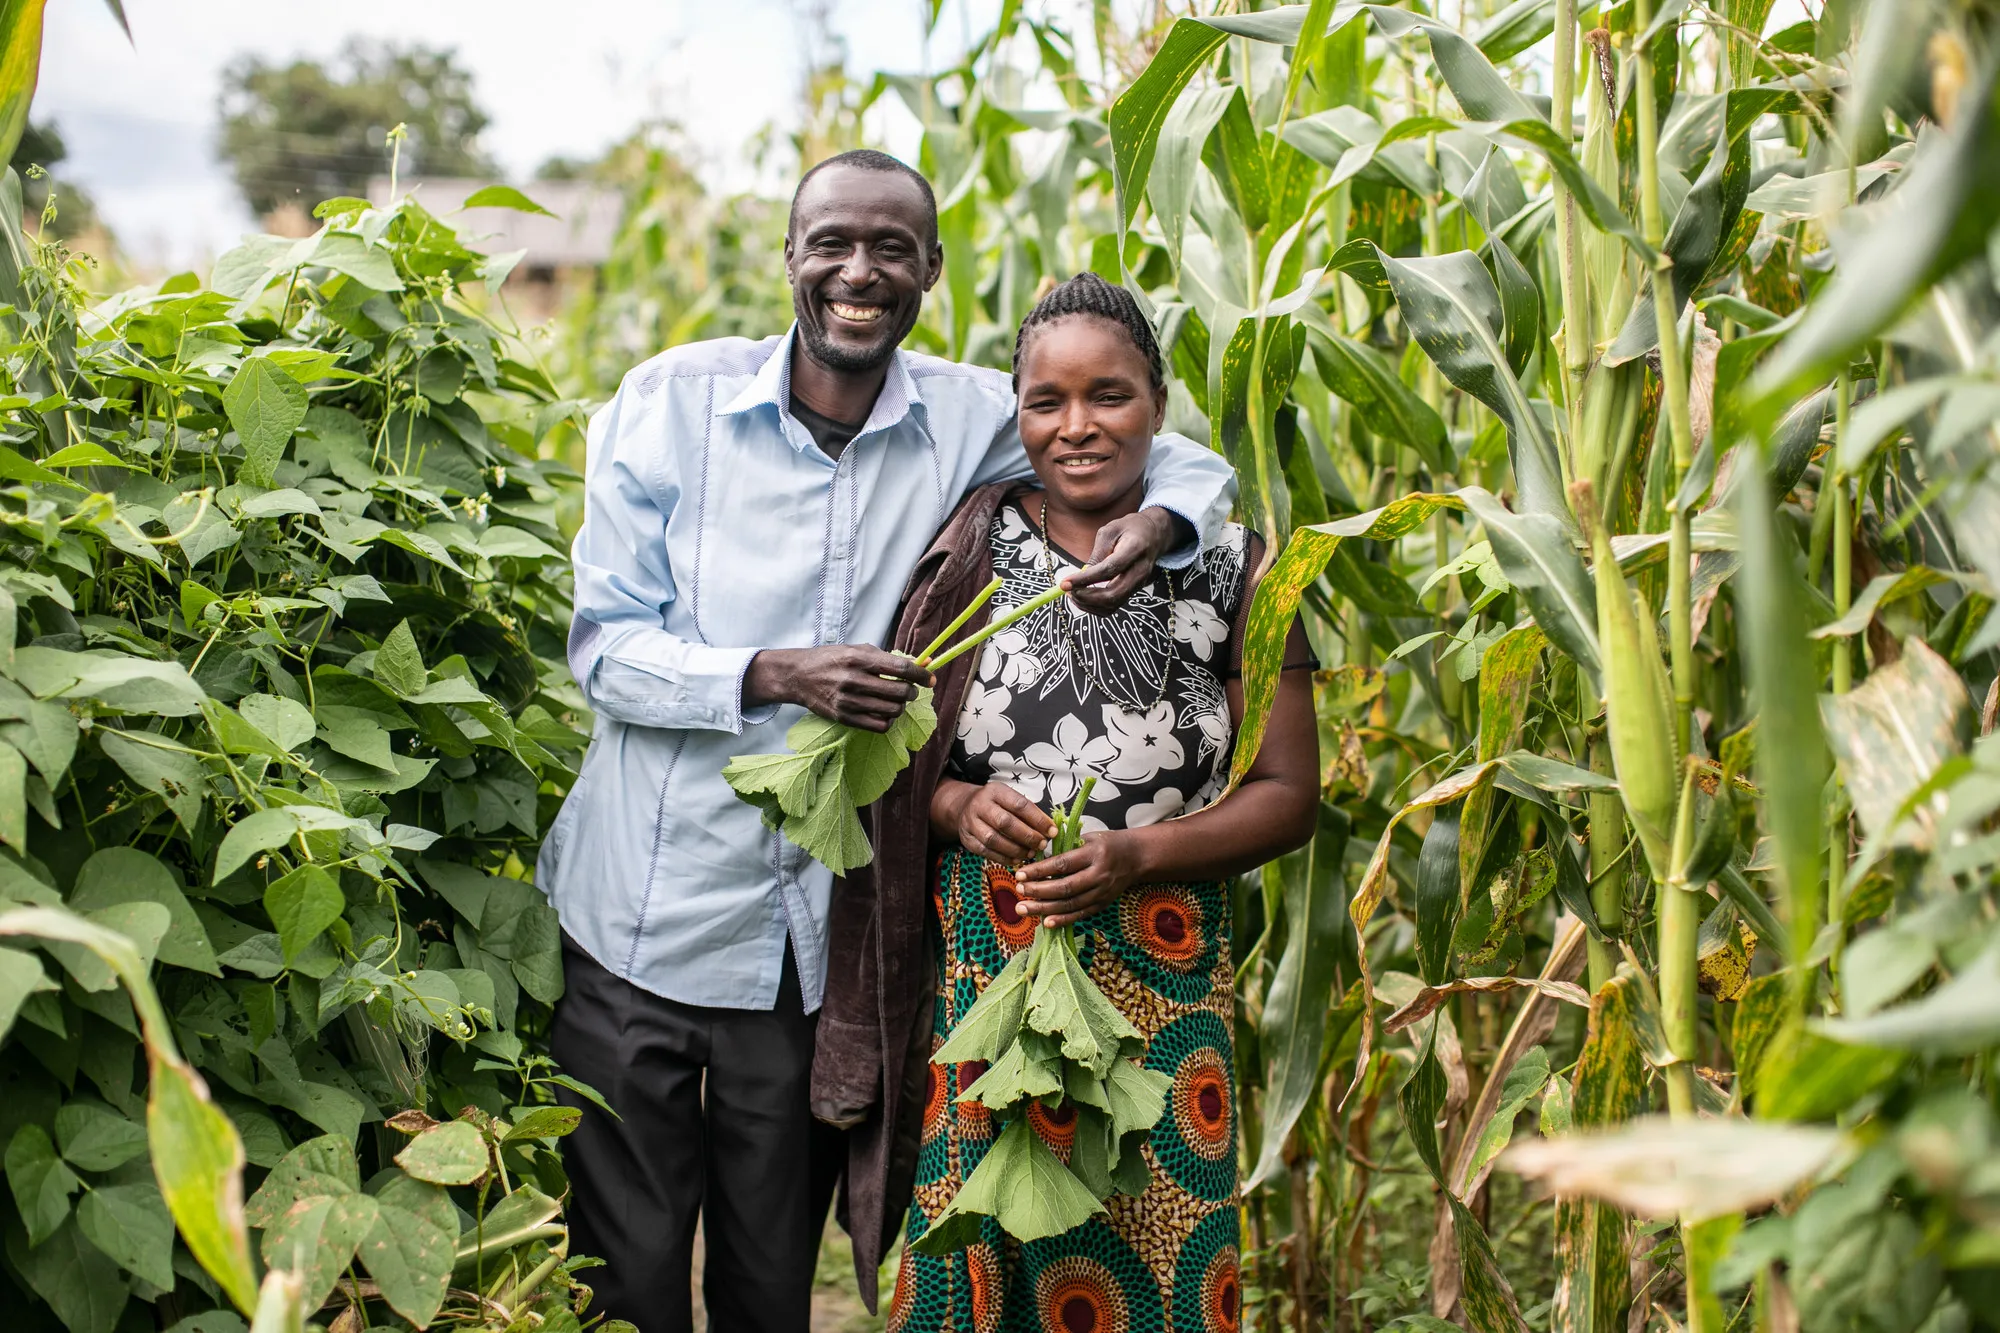 A man and woman smile while standing in a field full of tall crops